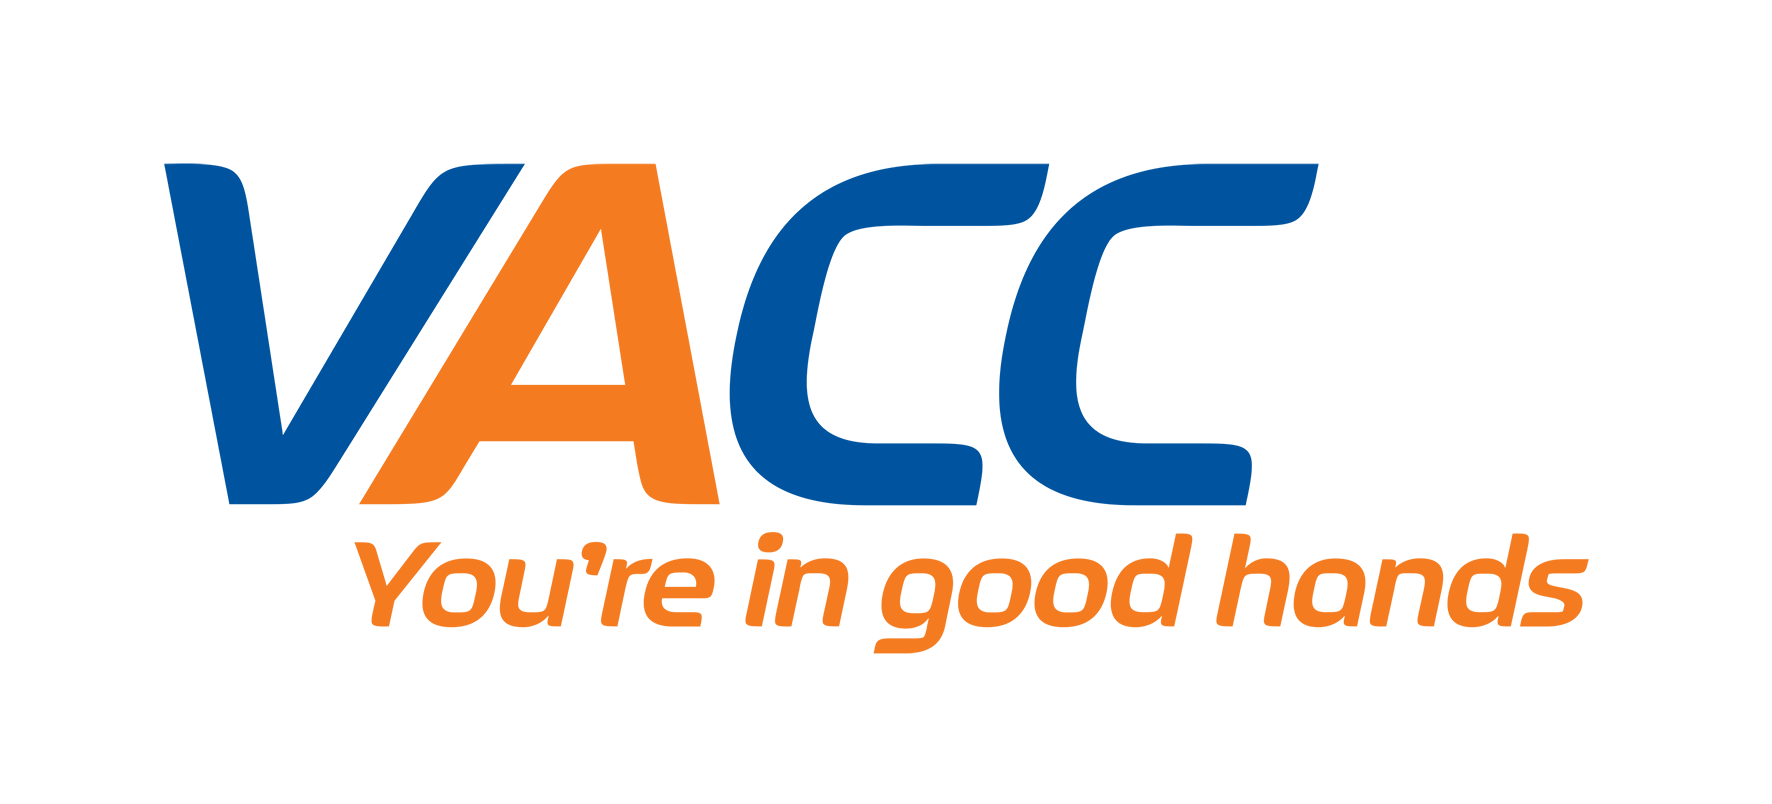 VACC - You're in good hands